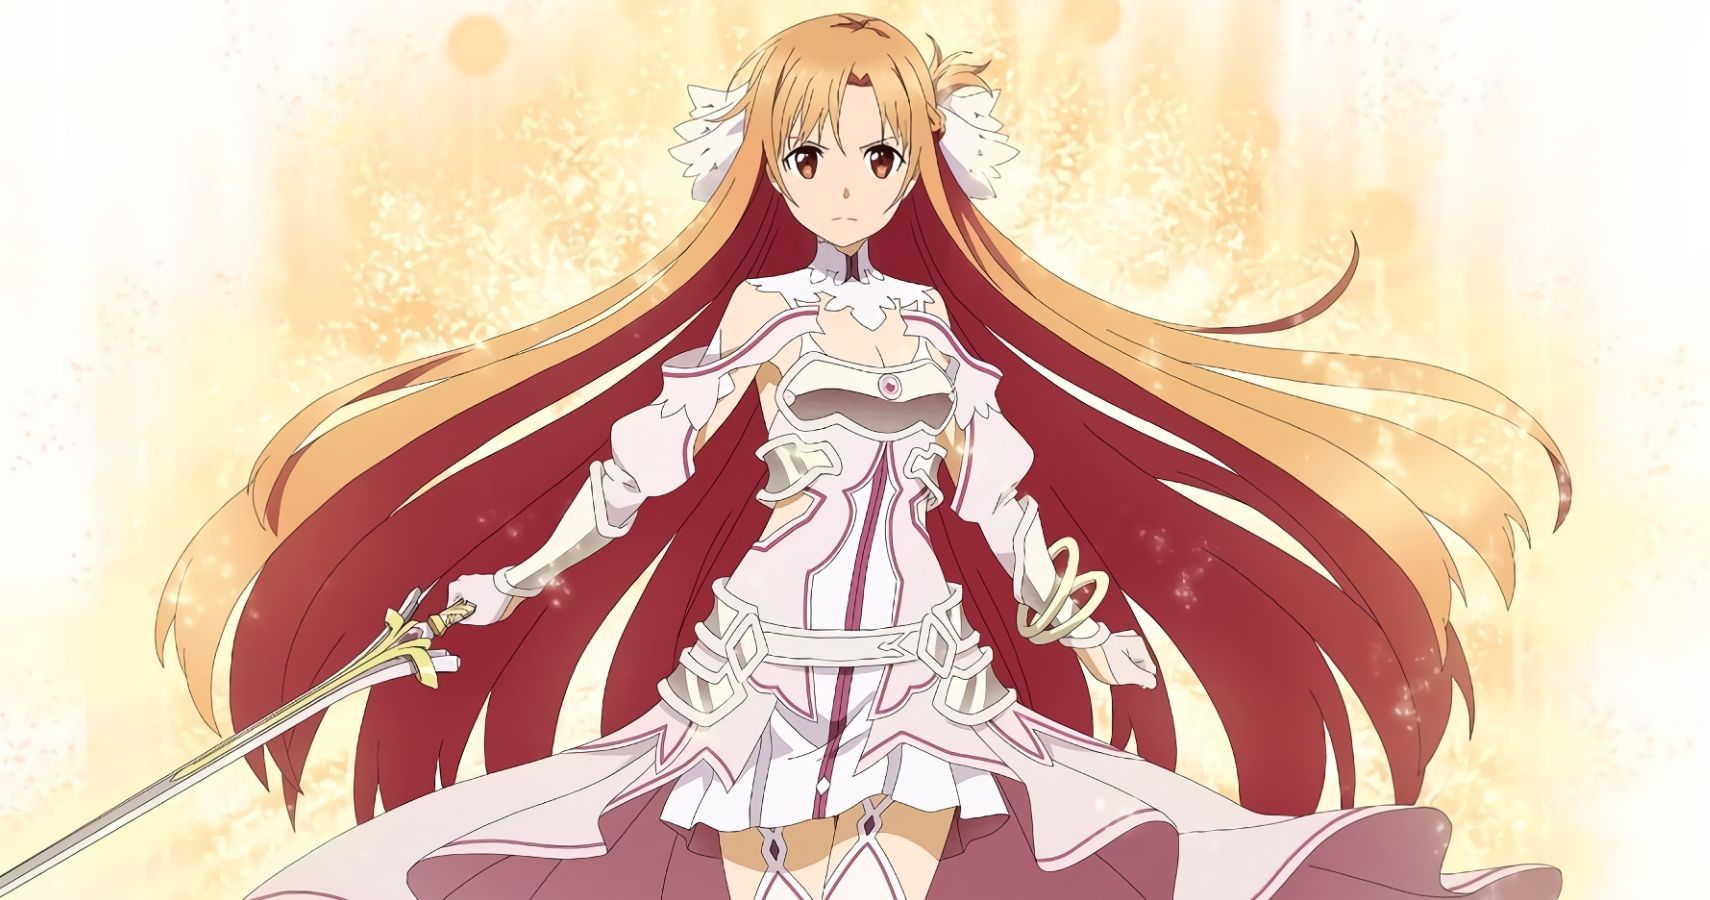 Download Anime Art SAO Characters Sunset Wallpaper | Wallpapers.com